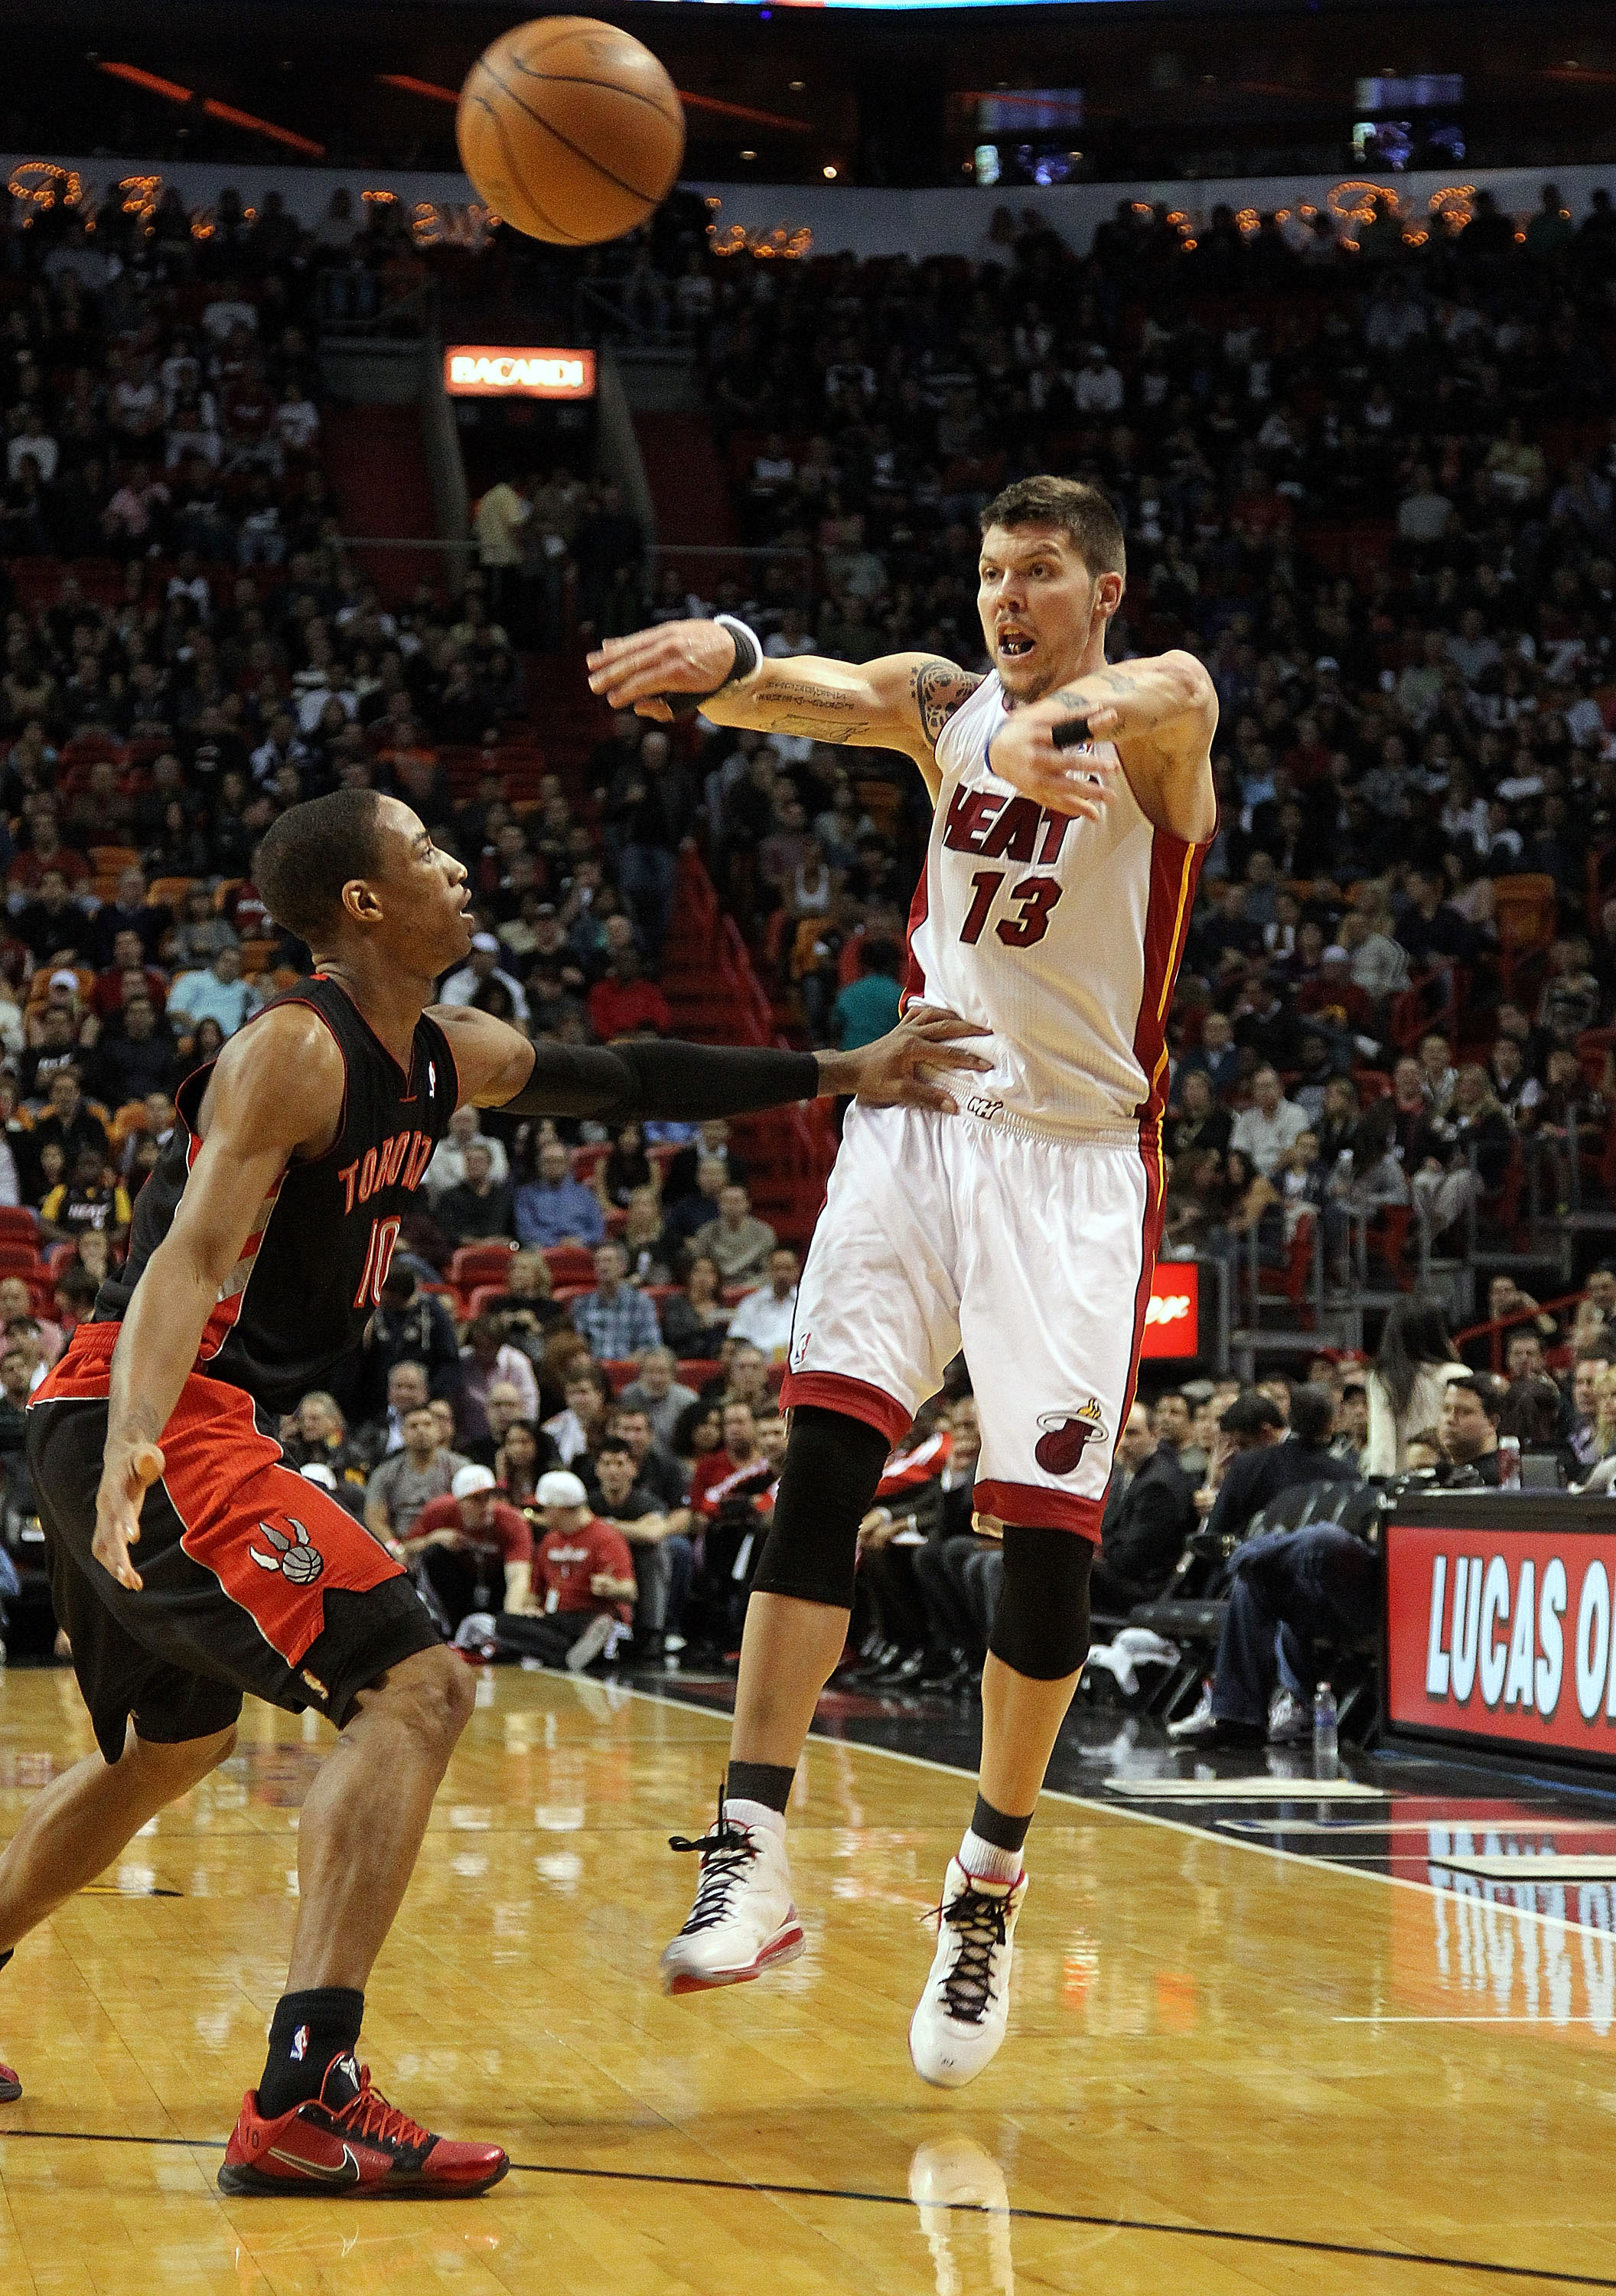 MIAMI, FL - JANUARY 22:  Mike Miller #13 of the Miami Heat spasses the ball during a game against the Toronto Raptors at American Airlines Arena on January 22, 2011 in Miami, Florida. NOTE TO USER: User expressly acknowledges and agrees that, by downloadi